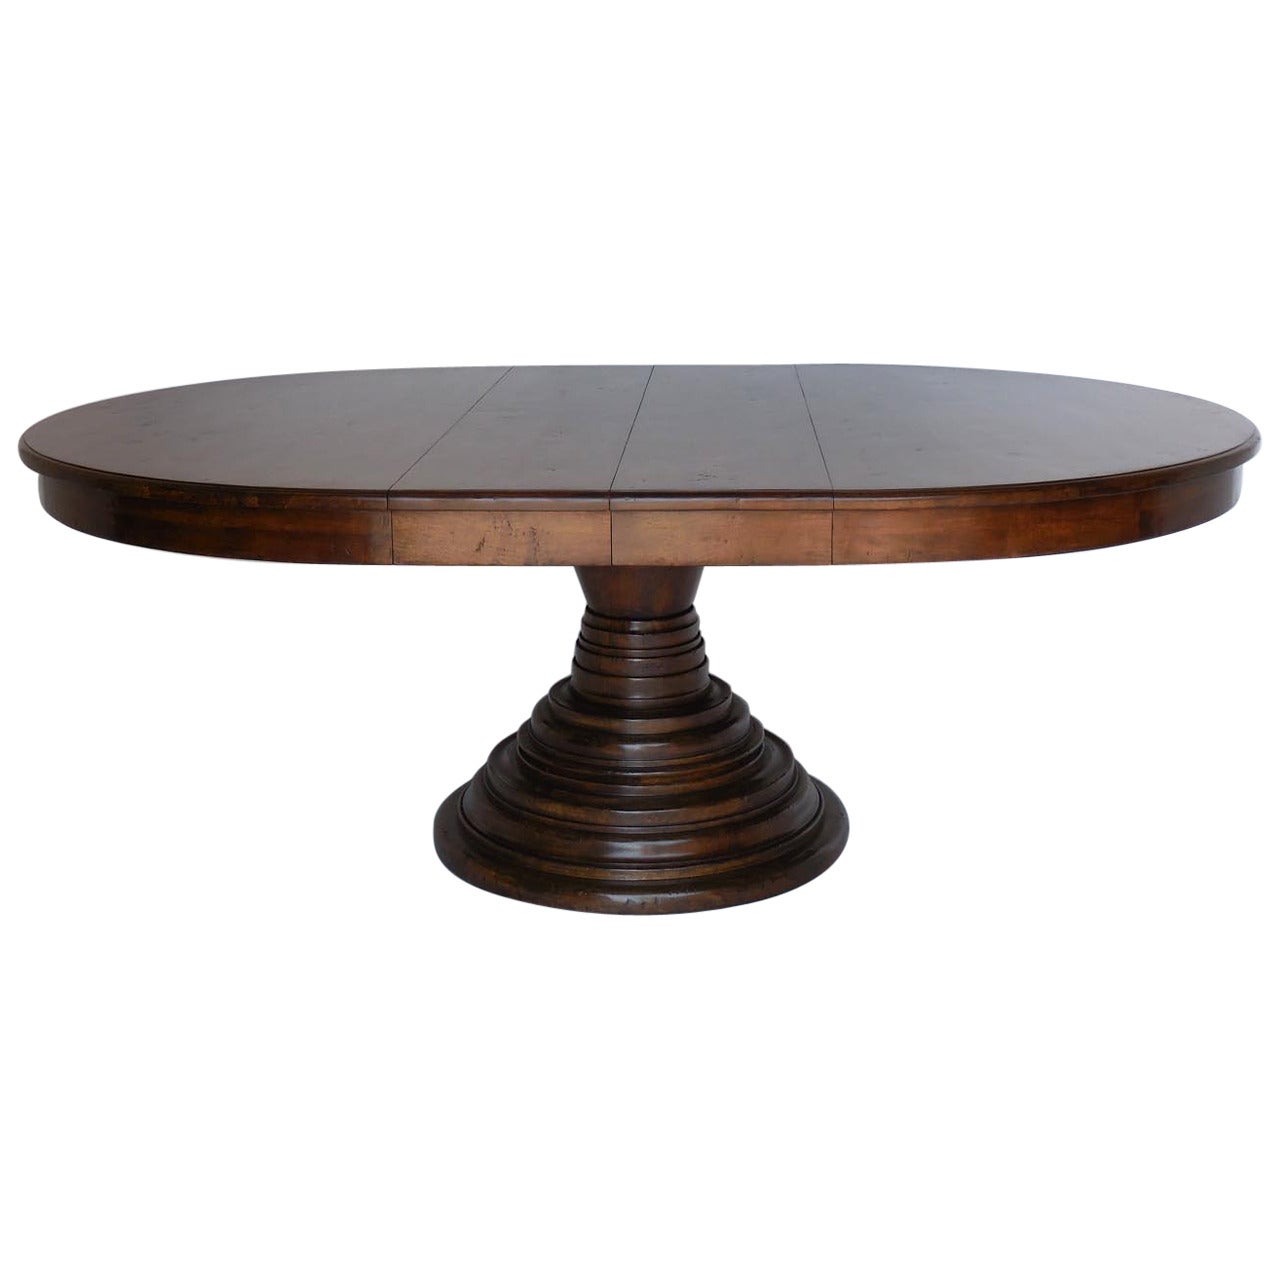 Dos Gallos Custom Walnut Wood Pedestal Dining Table with Leaves